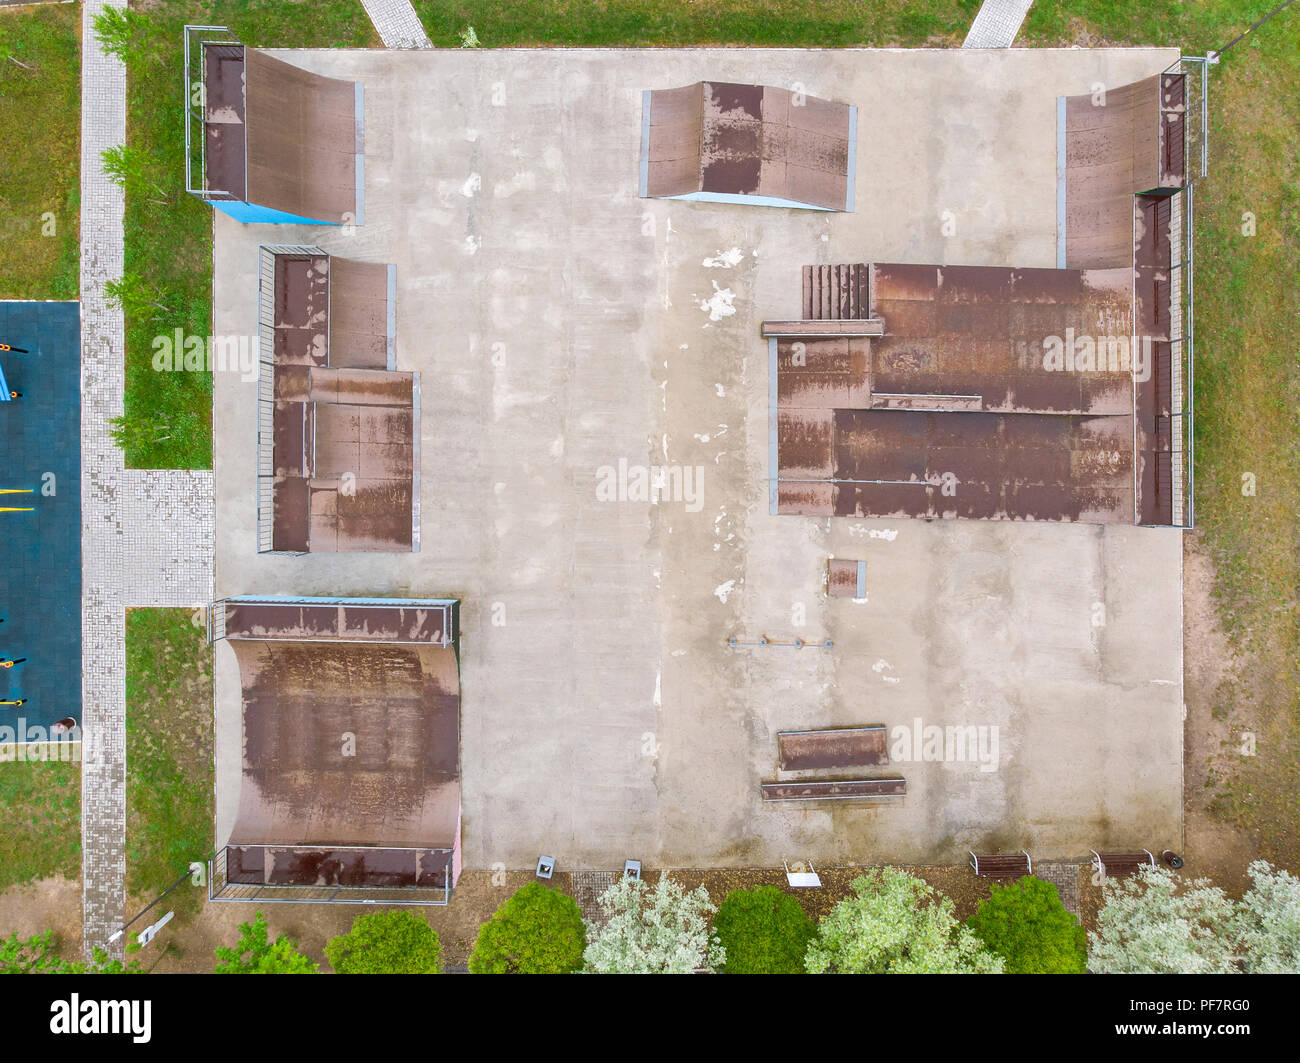 outdoor skatepark with various ramps. urban sports ground. aerial top view Stock Photo